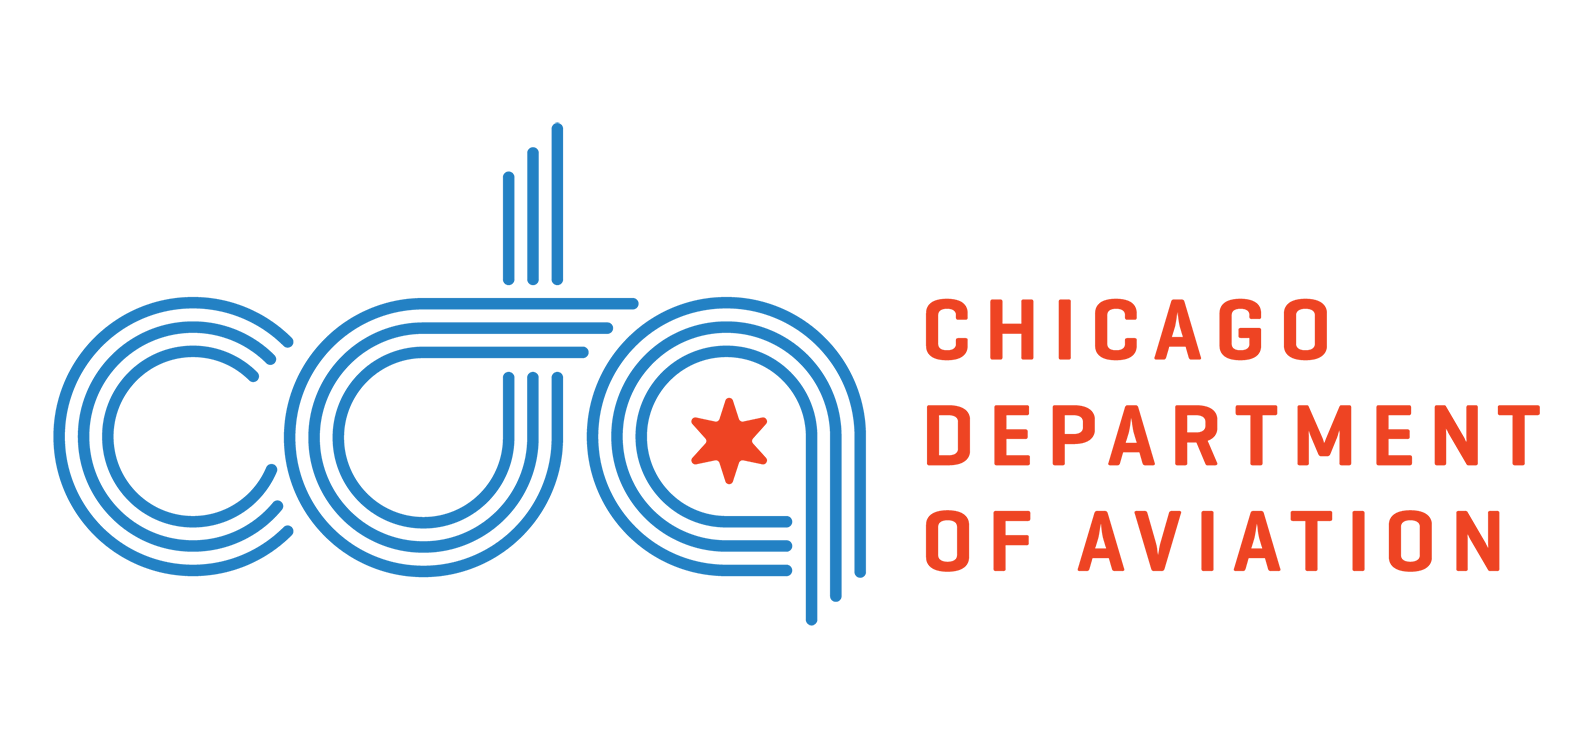 Chicago Department of Aviation